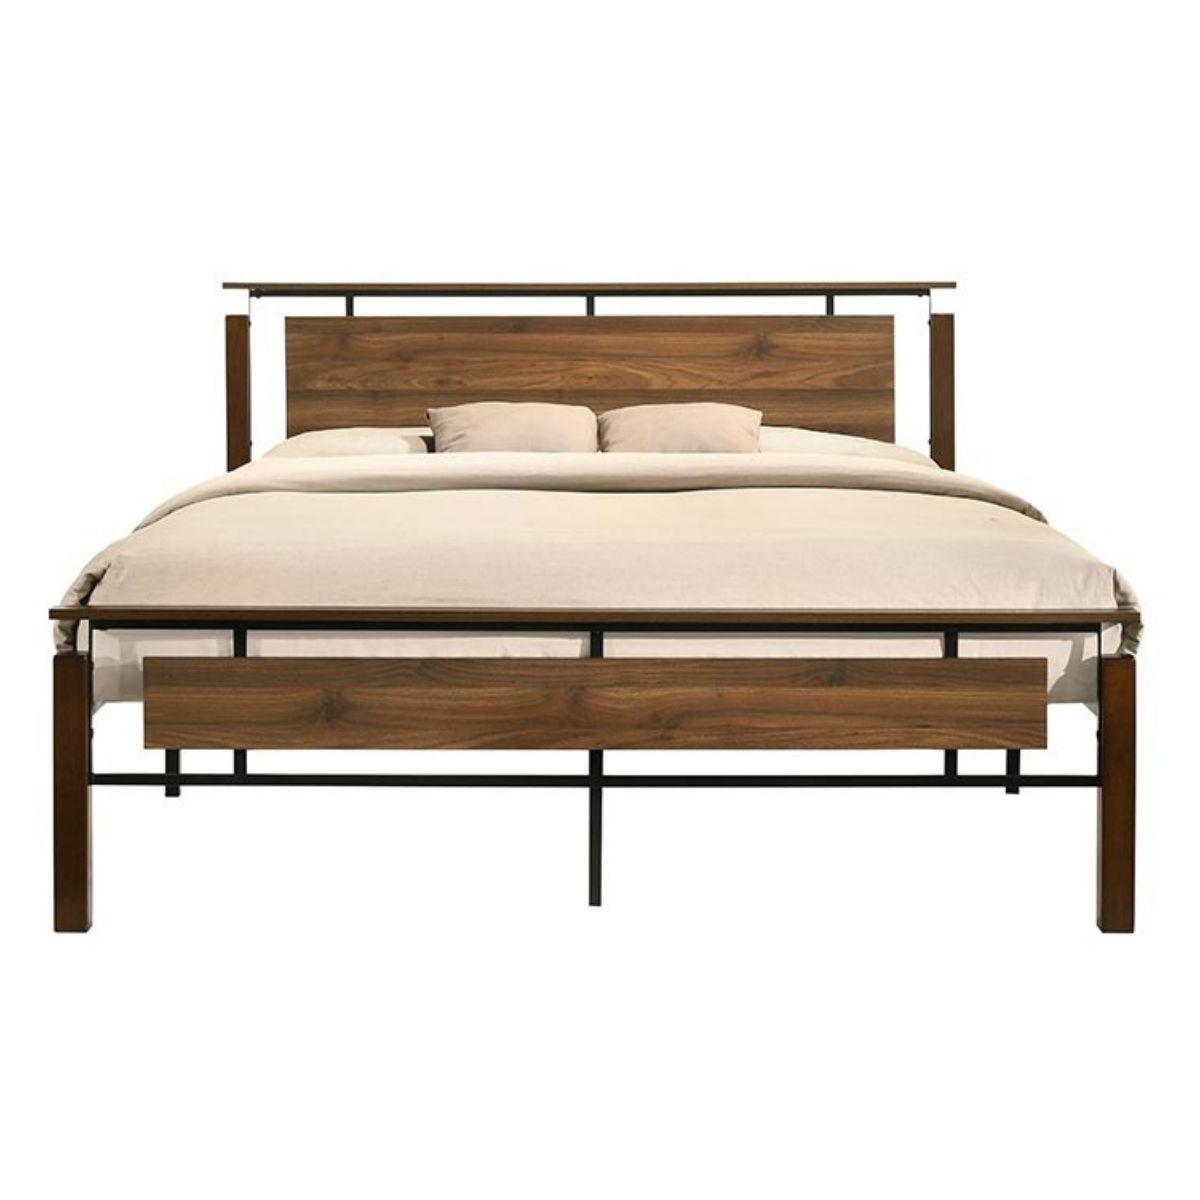 Nicole Industrial Bed Size King Single